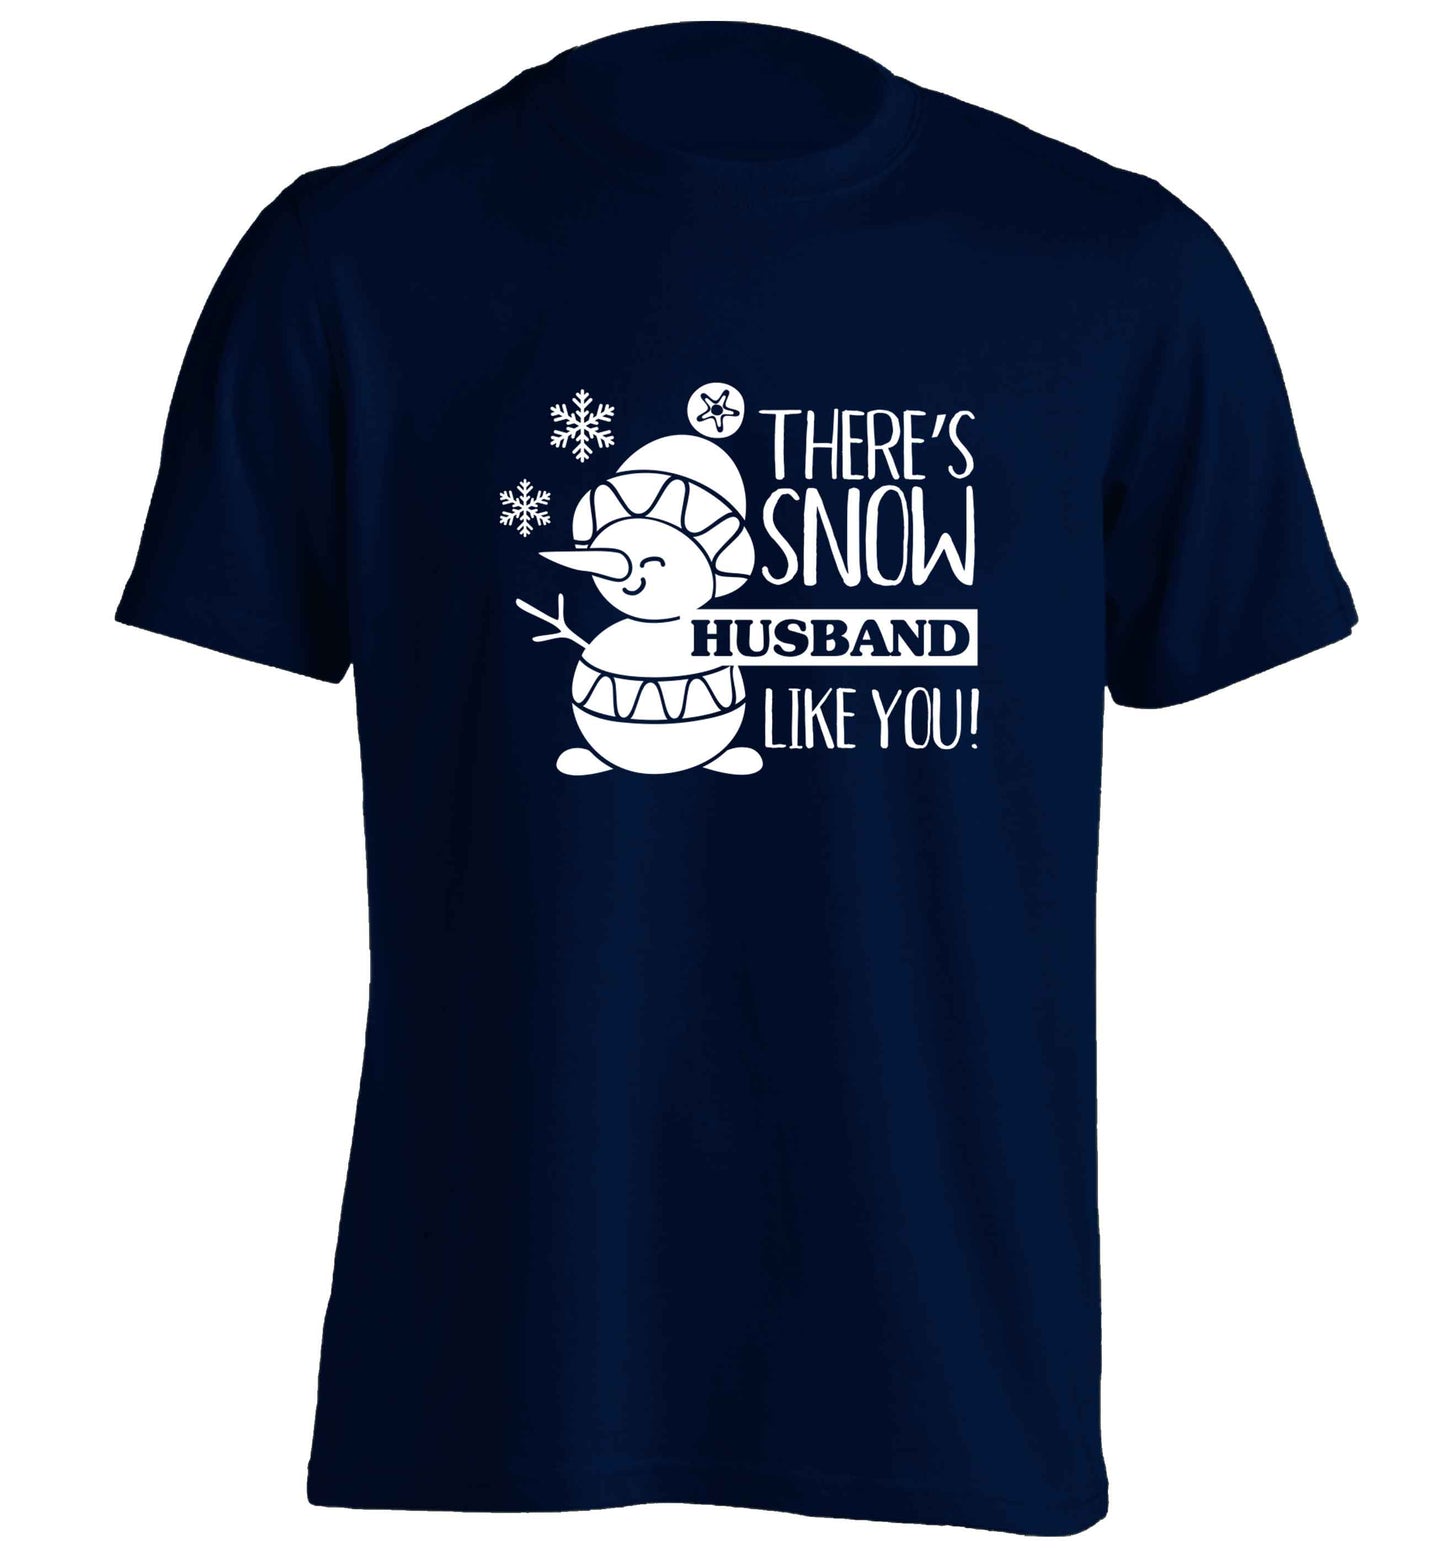 There's snow husband like you adults unisex navy Tshirt 2XL